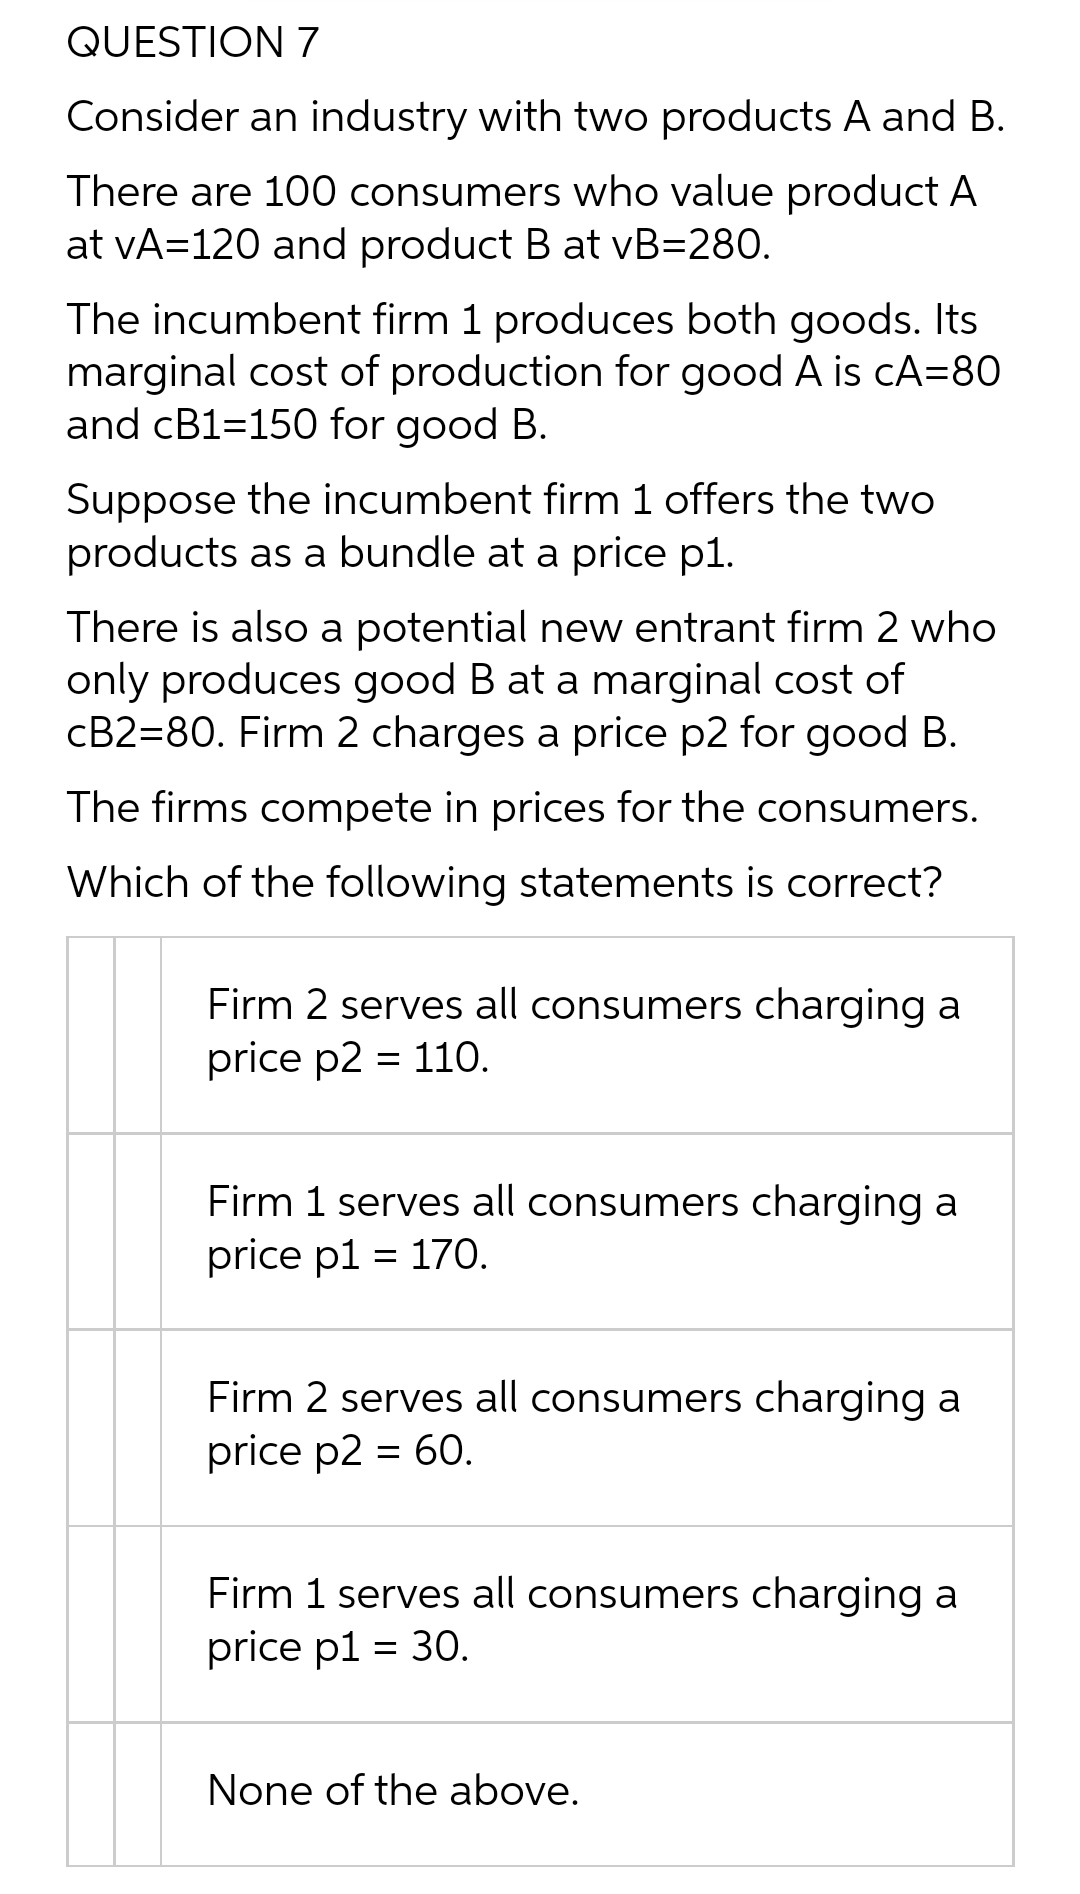 QUESTION 7
Consider an industry with two products A and B.
There are 100 consumers who value product A
at vA=120 and product B at vB=280.
The incumbent firm 1 produces both goods. Its
marginal cost of production for good A is cA=80
and CB1=150 for good B.
Suppose the incumbent firm 1 offers the two
products as a bundle at a price p1.
There is also a potential new entrant firm 2 who
only produces good B at a marginal cost of
cB2=80. Firm 2 charges a price p2 for good B.
The firms compete in prices for the consumers.
Which of the following statements is correct?
Firm 2 serves all consumers charging a
price p2 = 110.
Firm 1 serves all consumers charging a
price p1 = 170.
Firm 2 serves all consumers charging a
price p2 = 60.
Firm 1 serves all consumers charging a
price p1 = 30.
None of the above.